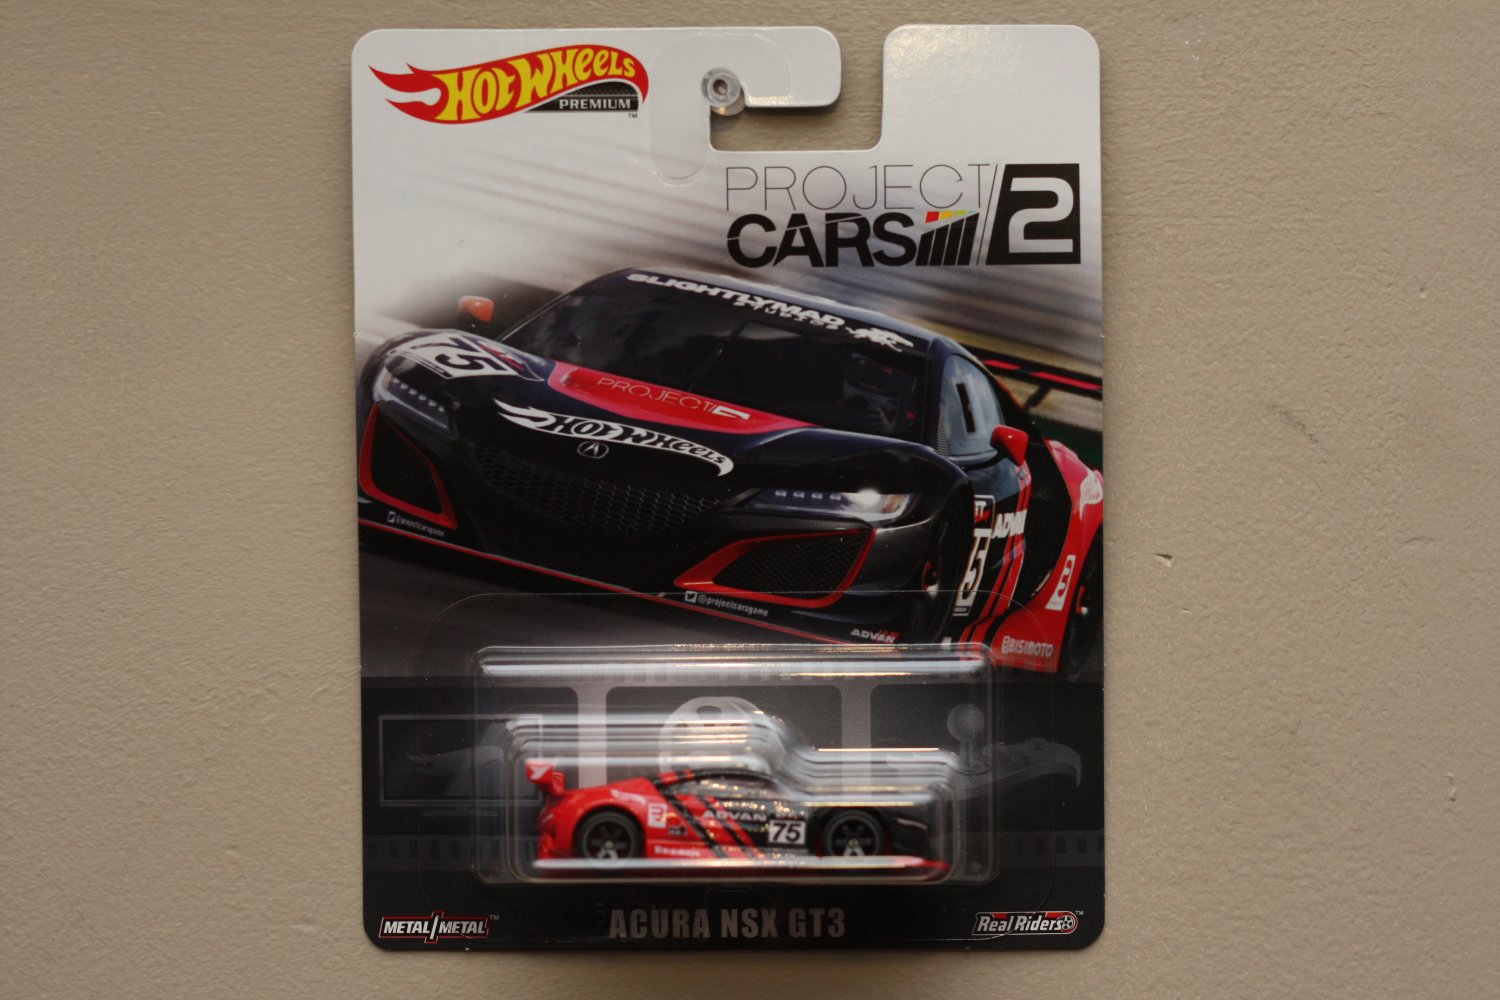 Hot Wheels 2019 Entertainment Project Cars 2 Acura NSX GT3